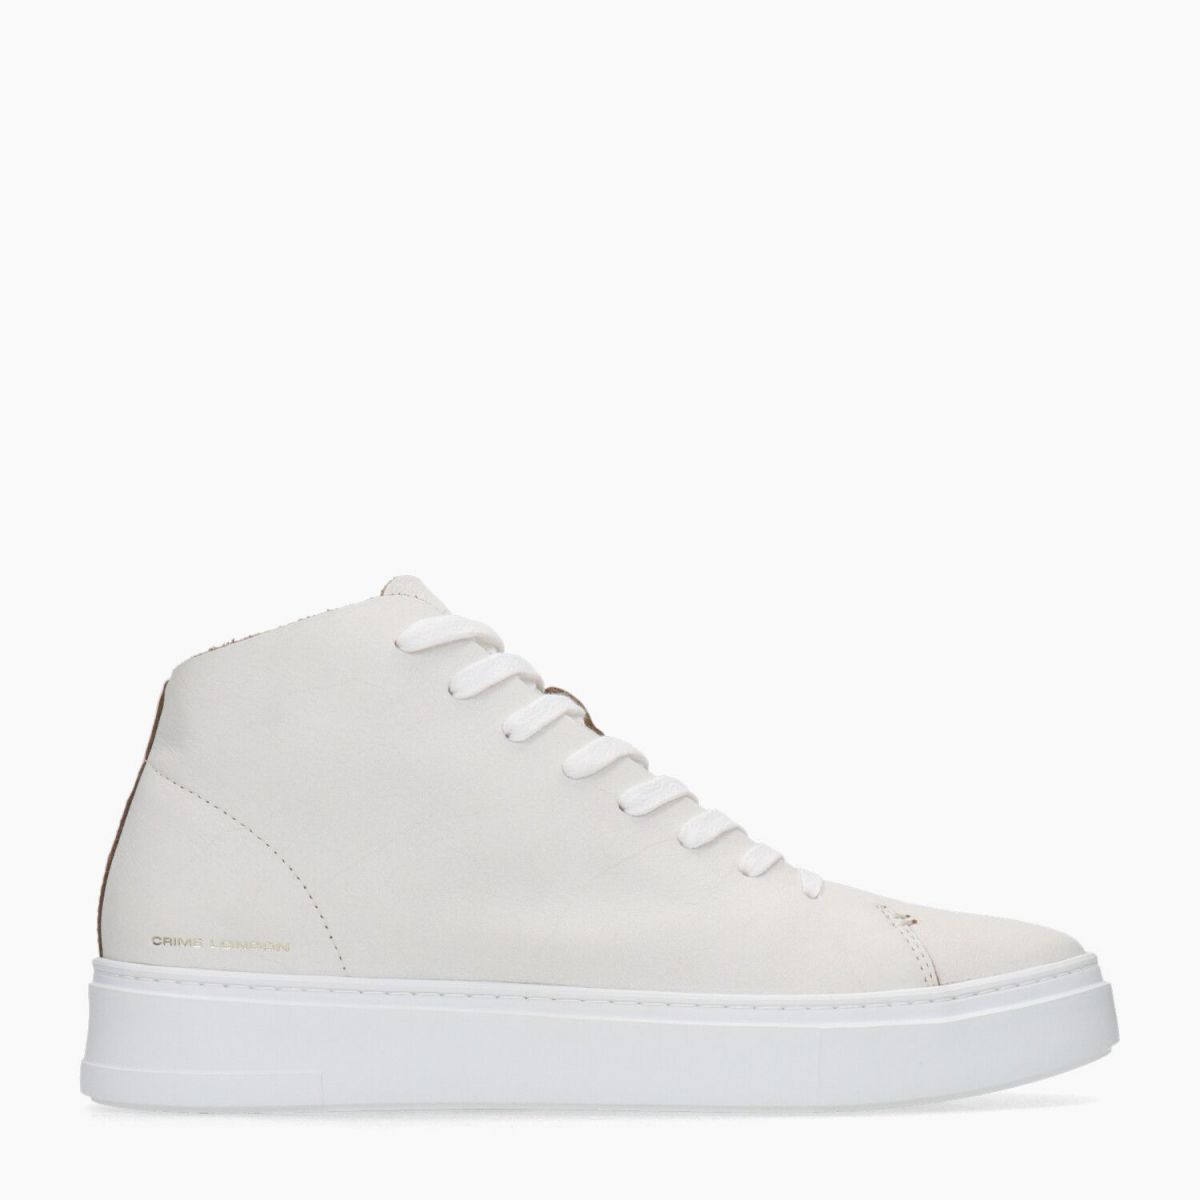 Crime London Sneakers Weightless Raw Cut Mid Bianco 13450PP4-BIANCO-022